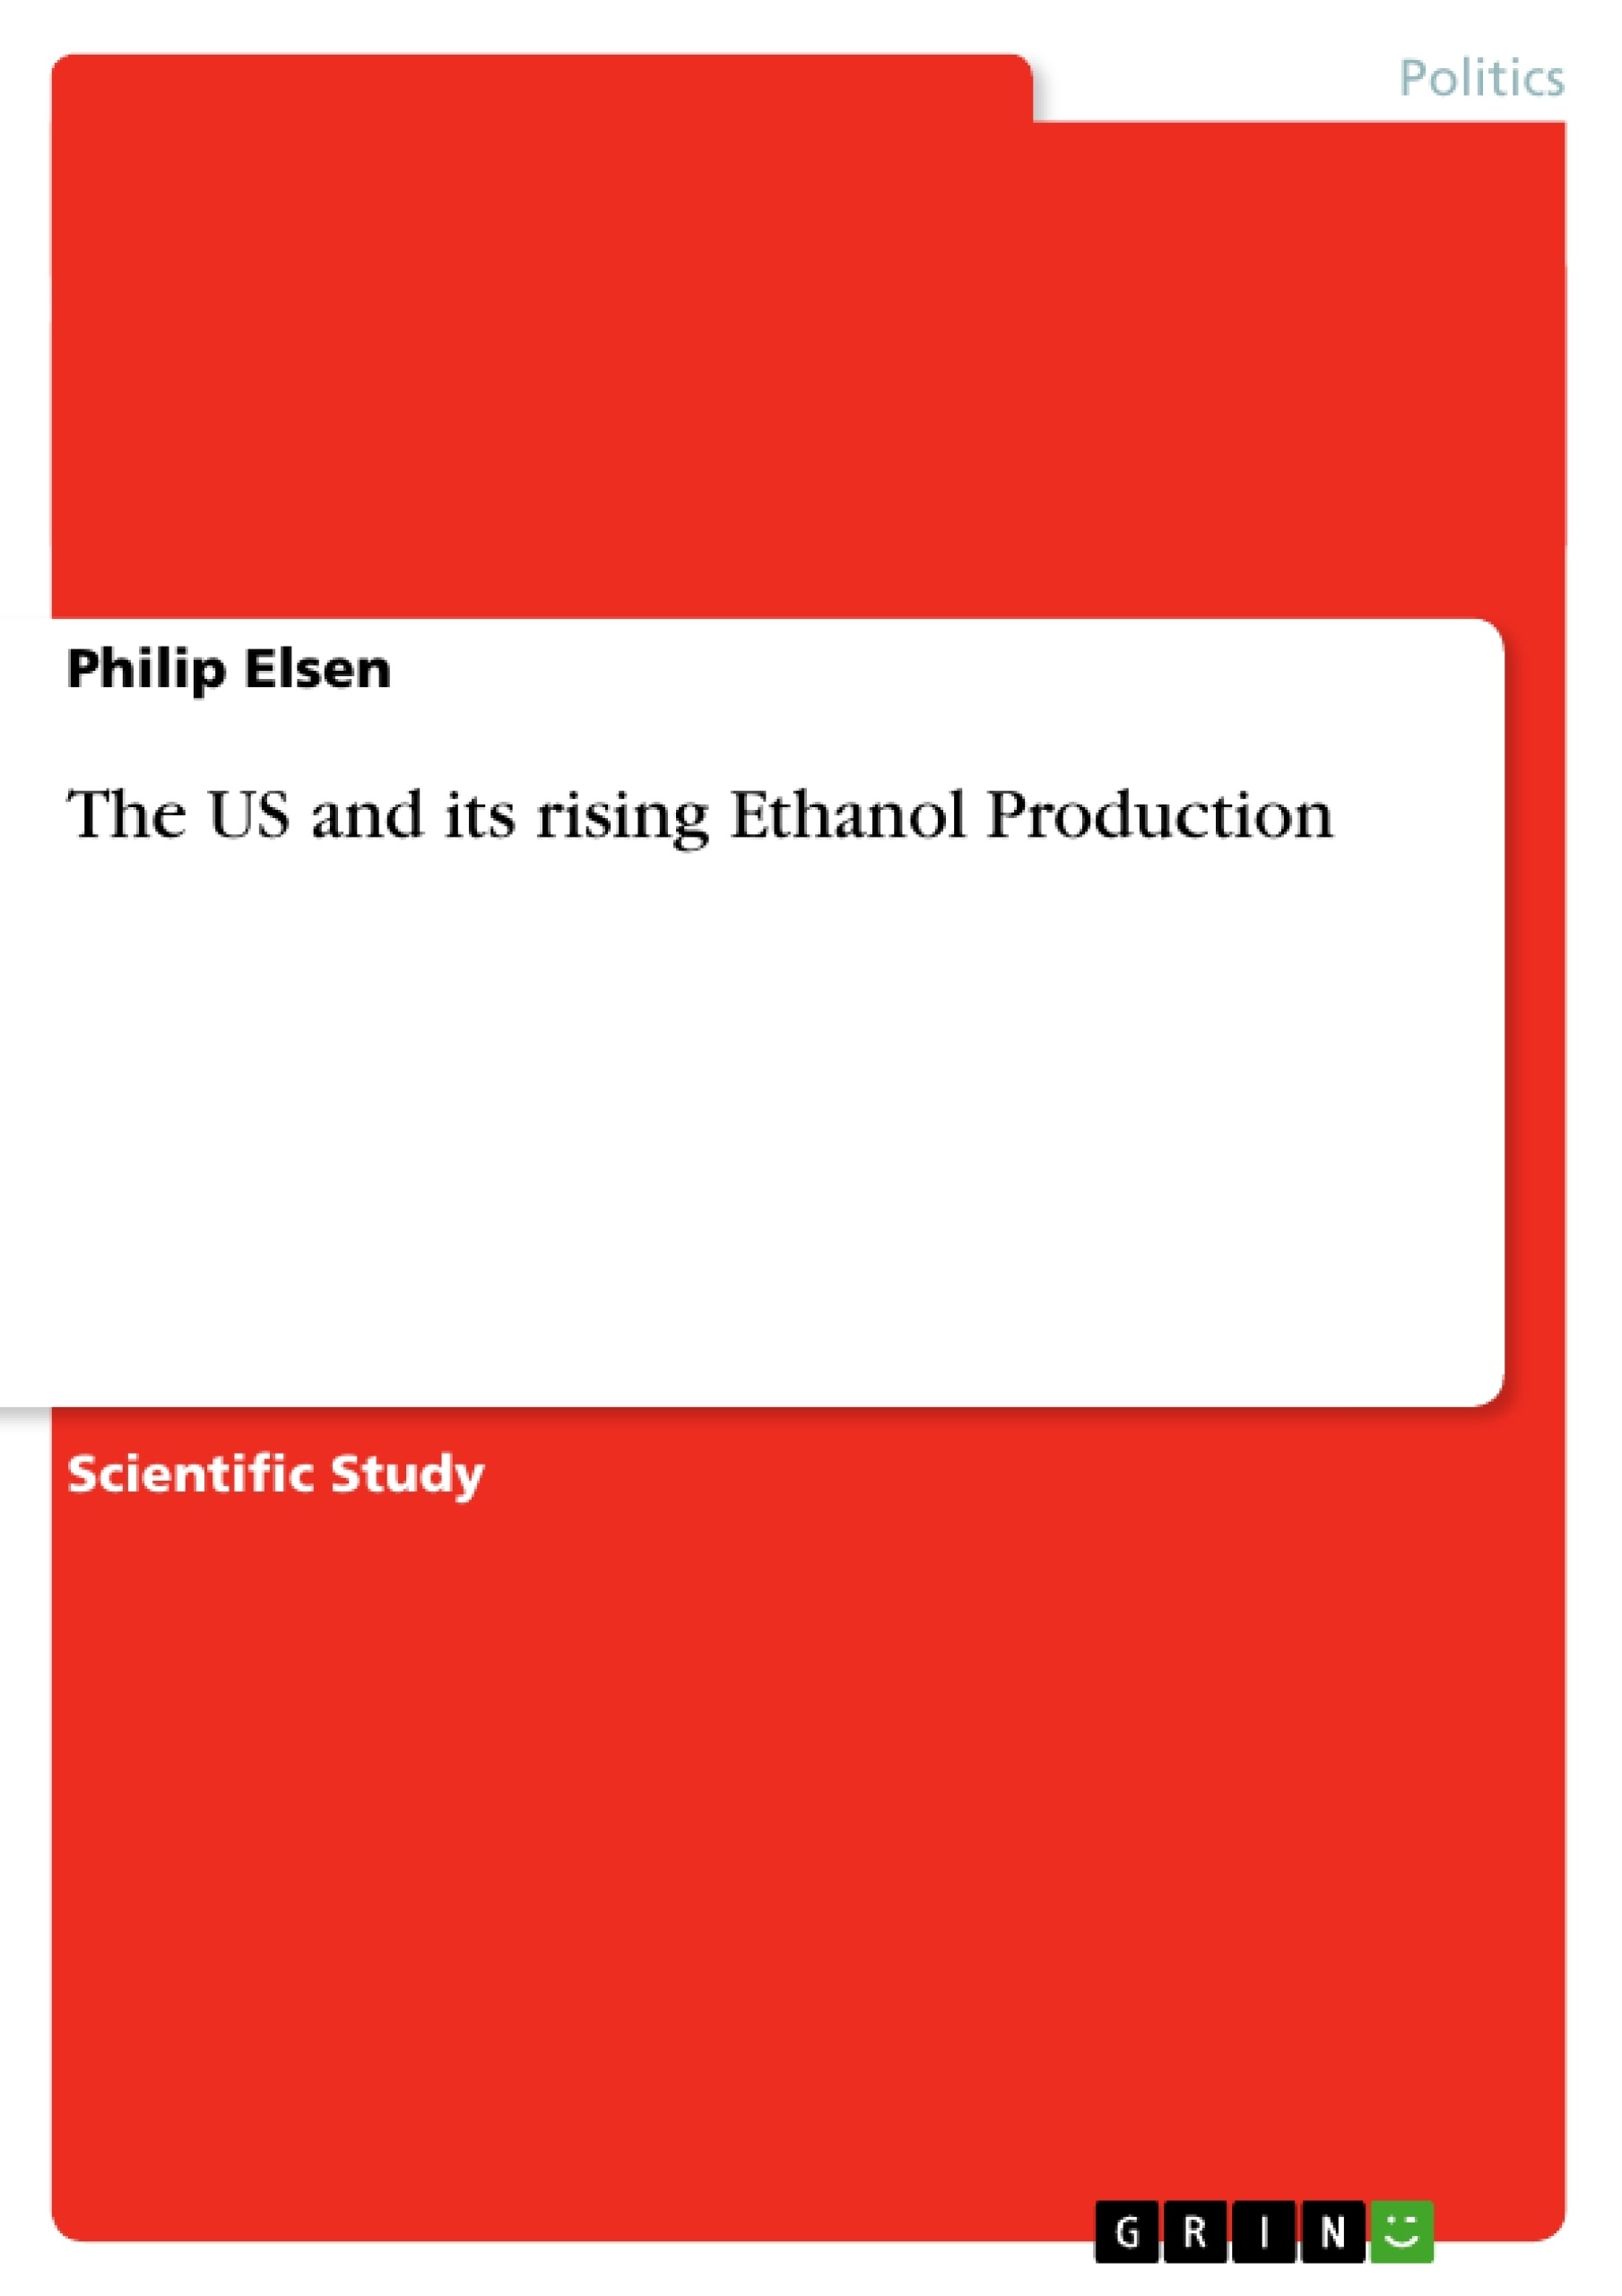 Titre: The US and its rising Ethanol Production